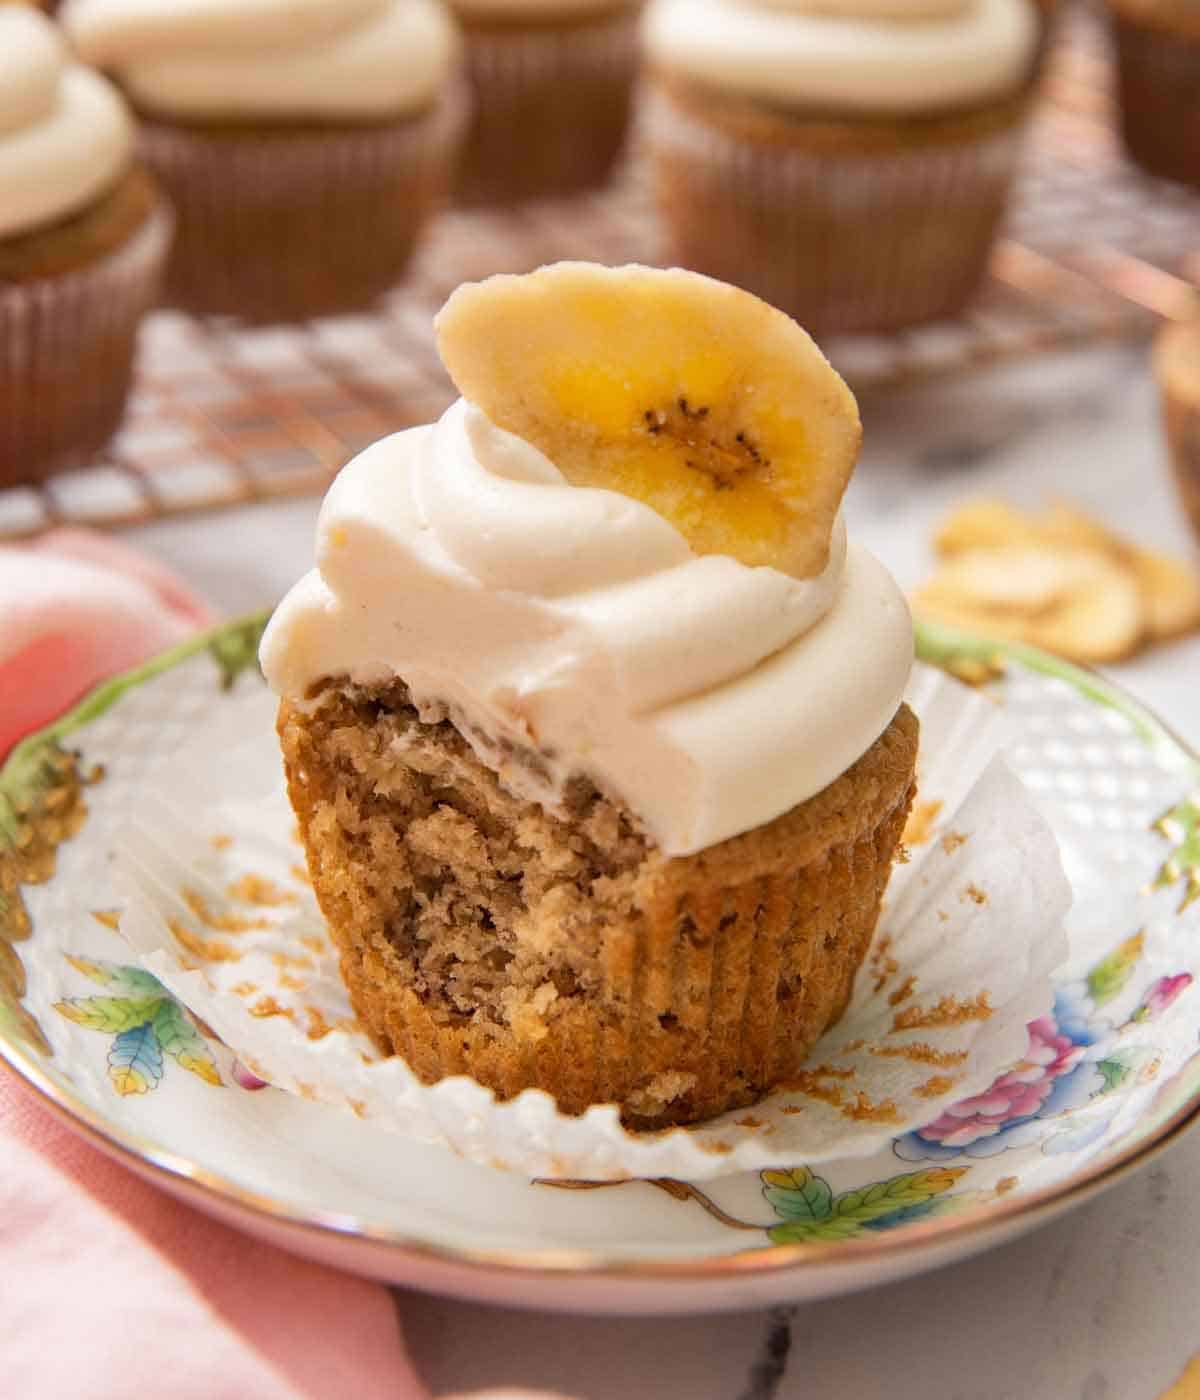 A banana cupcake with the liner pulled out with a bite taken.